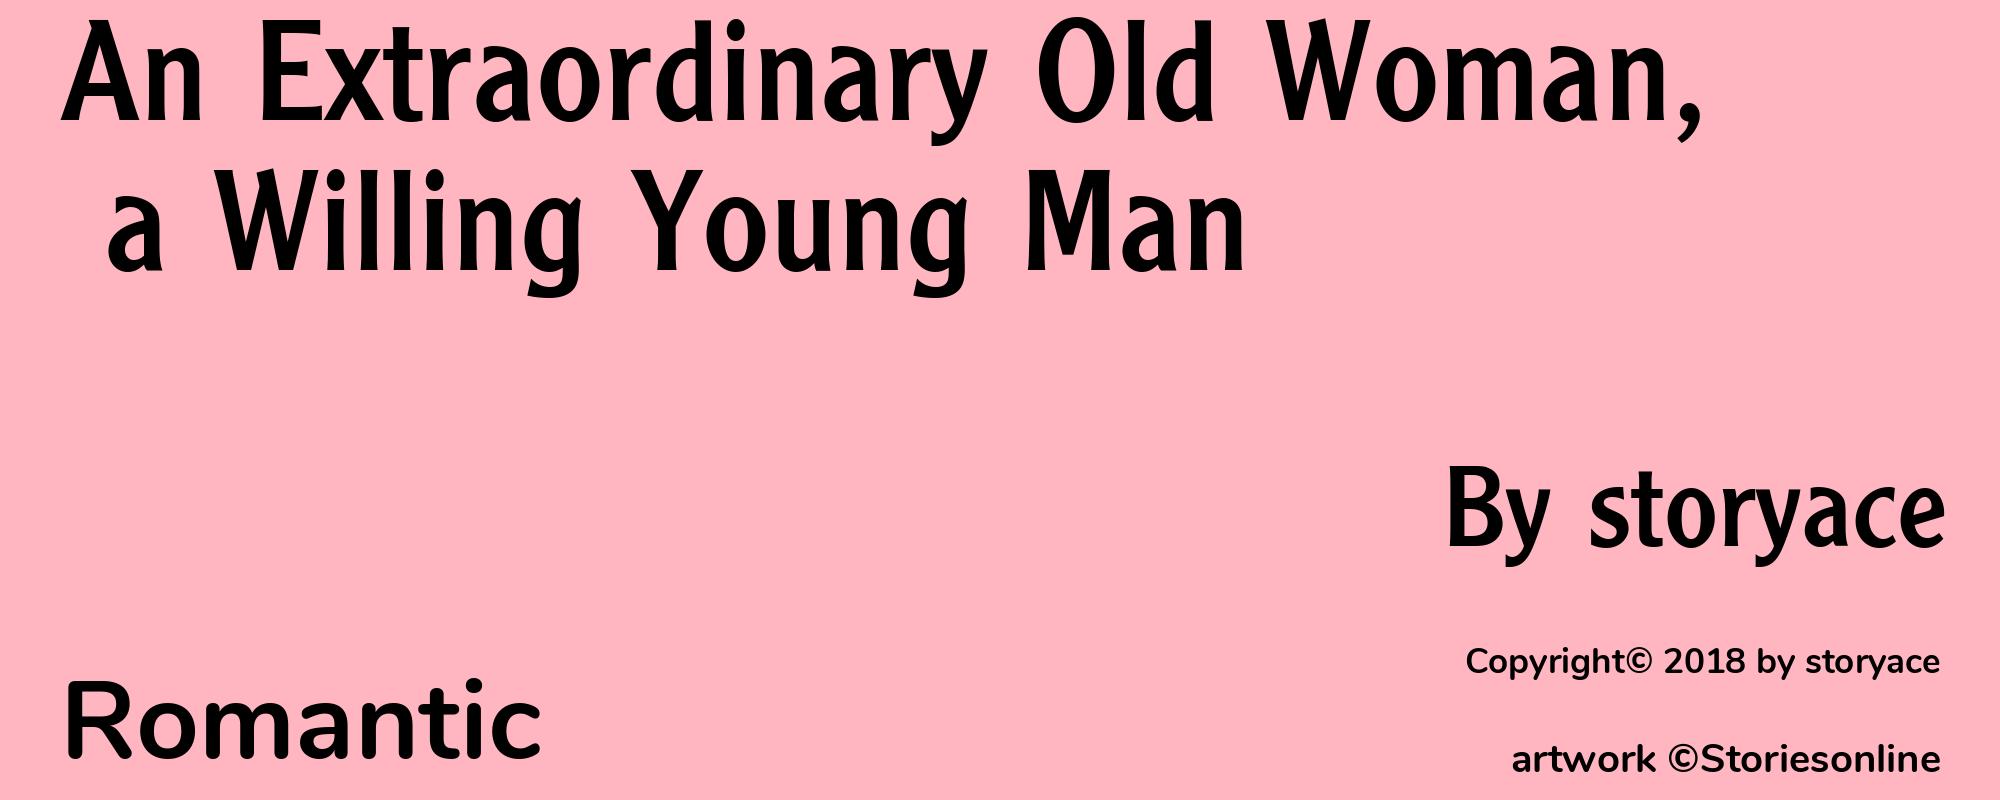 An Extraordinary Old Woman, a Willing Young Man - Cover